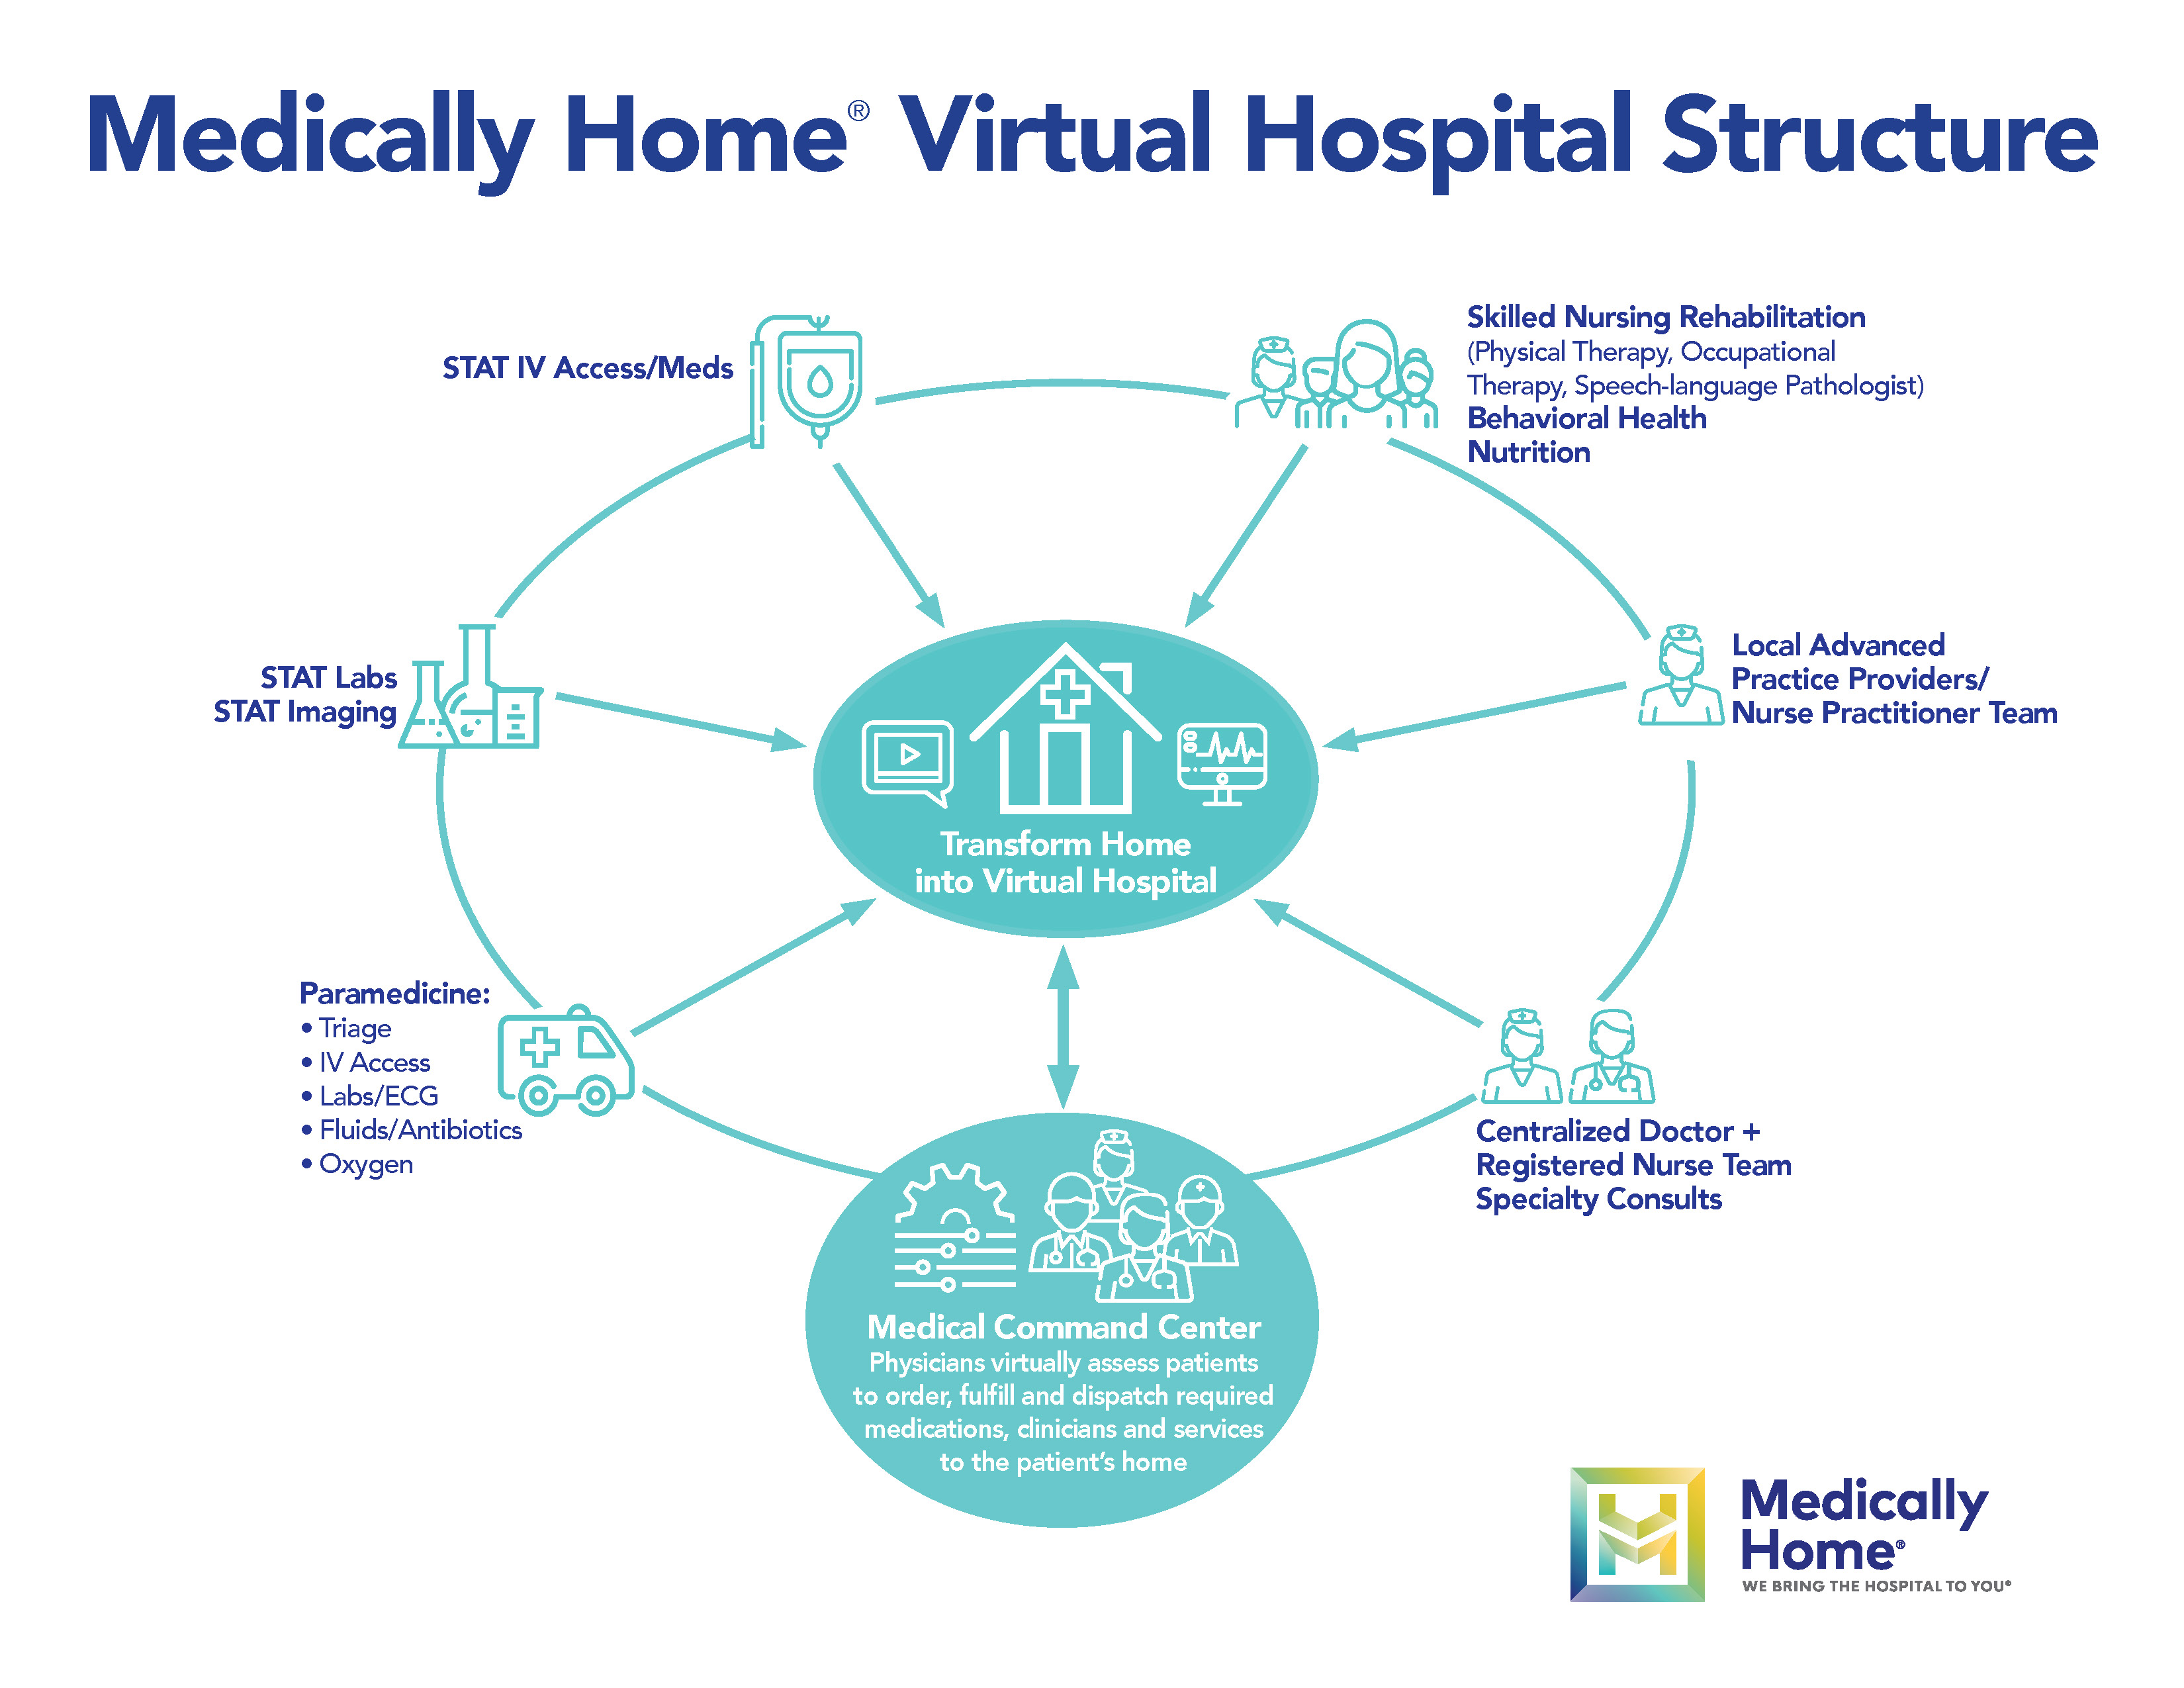 Medically Home draws on its health system partners and community resources, including local paramedics and equipment suppliers, to build a virtual hospital.